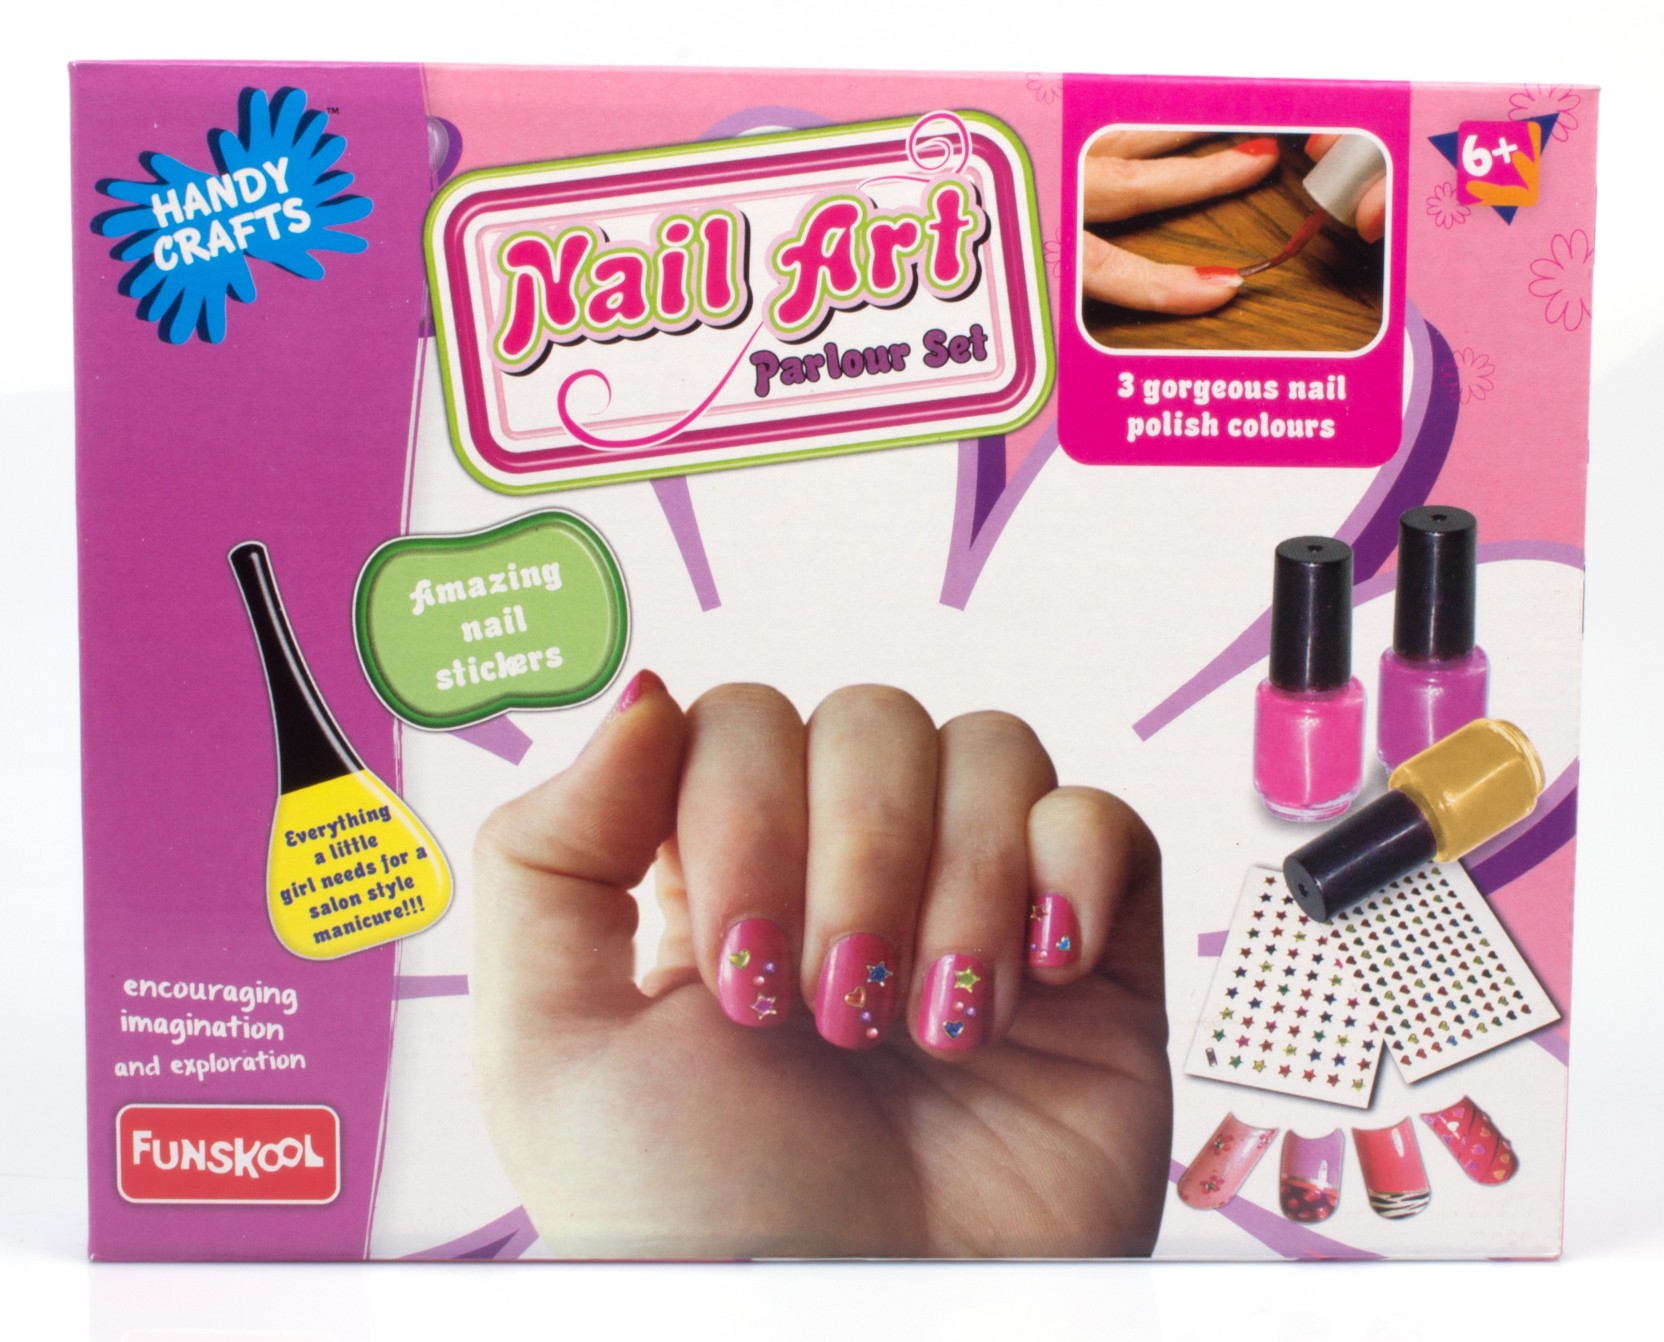 5. The Nail Spa - wide 9